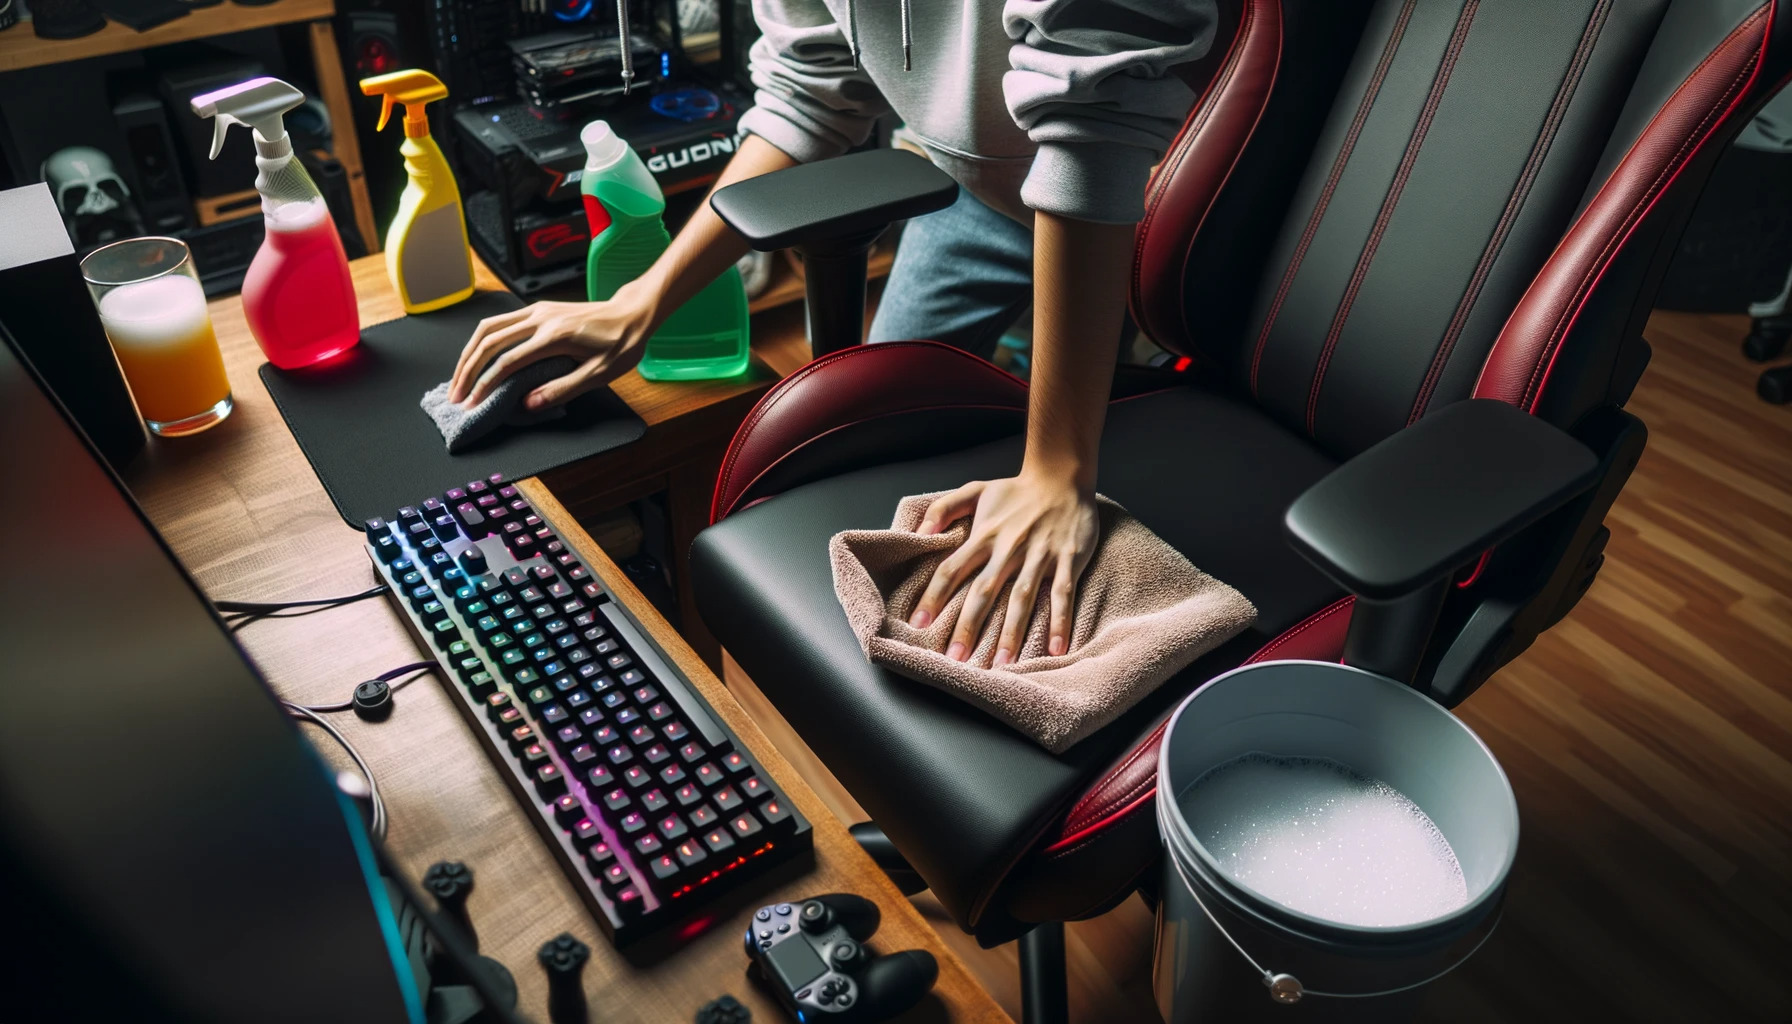 How to Clean Gaming Chair - The Ultimate Guide